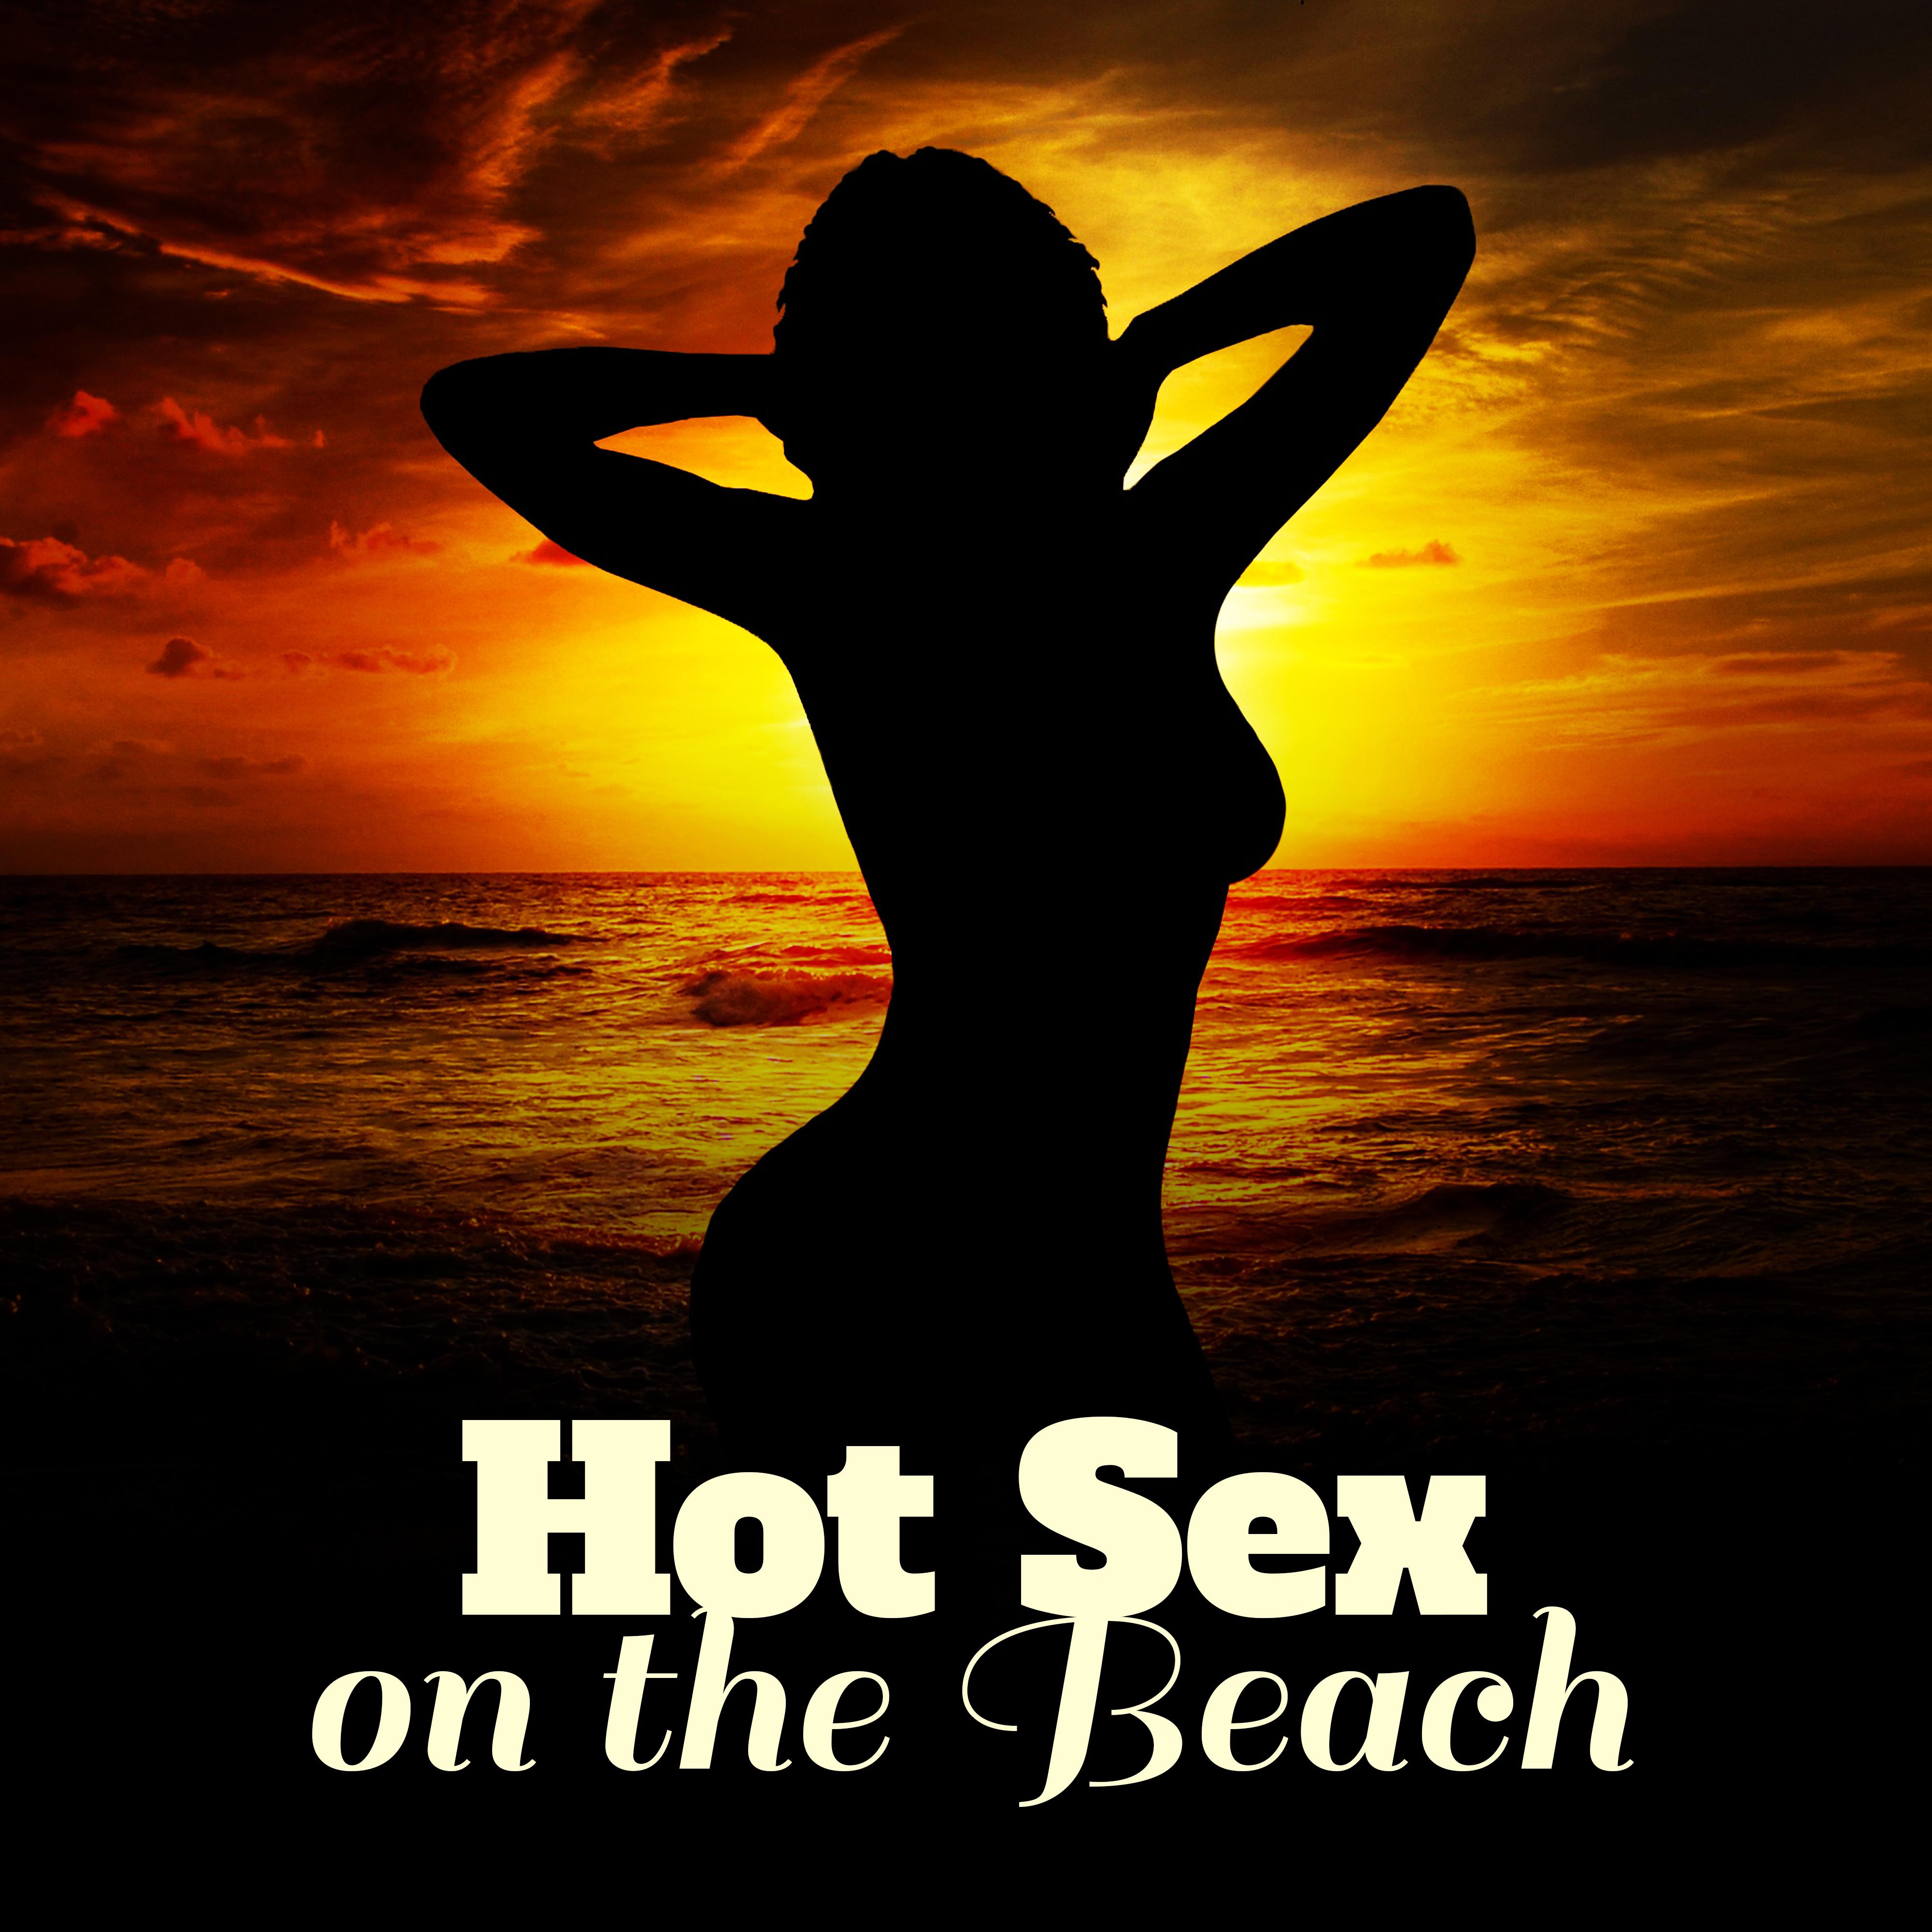 Hot *** on the Beach – Summer Love, **** Vibes, Sensual Chill, Erotic Time for Two